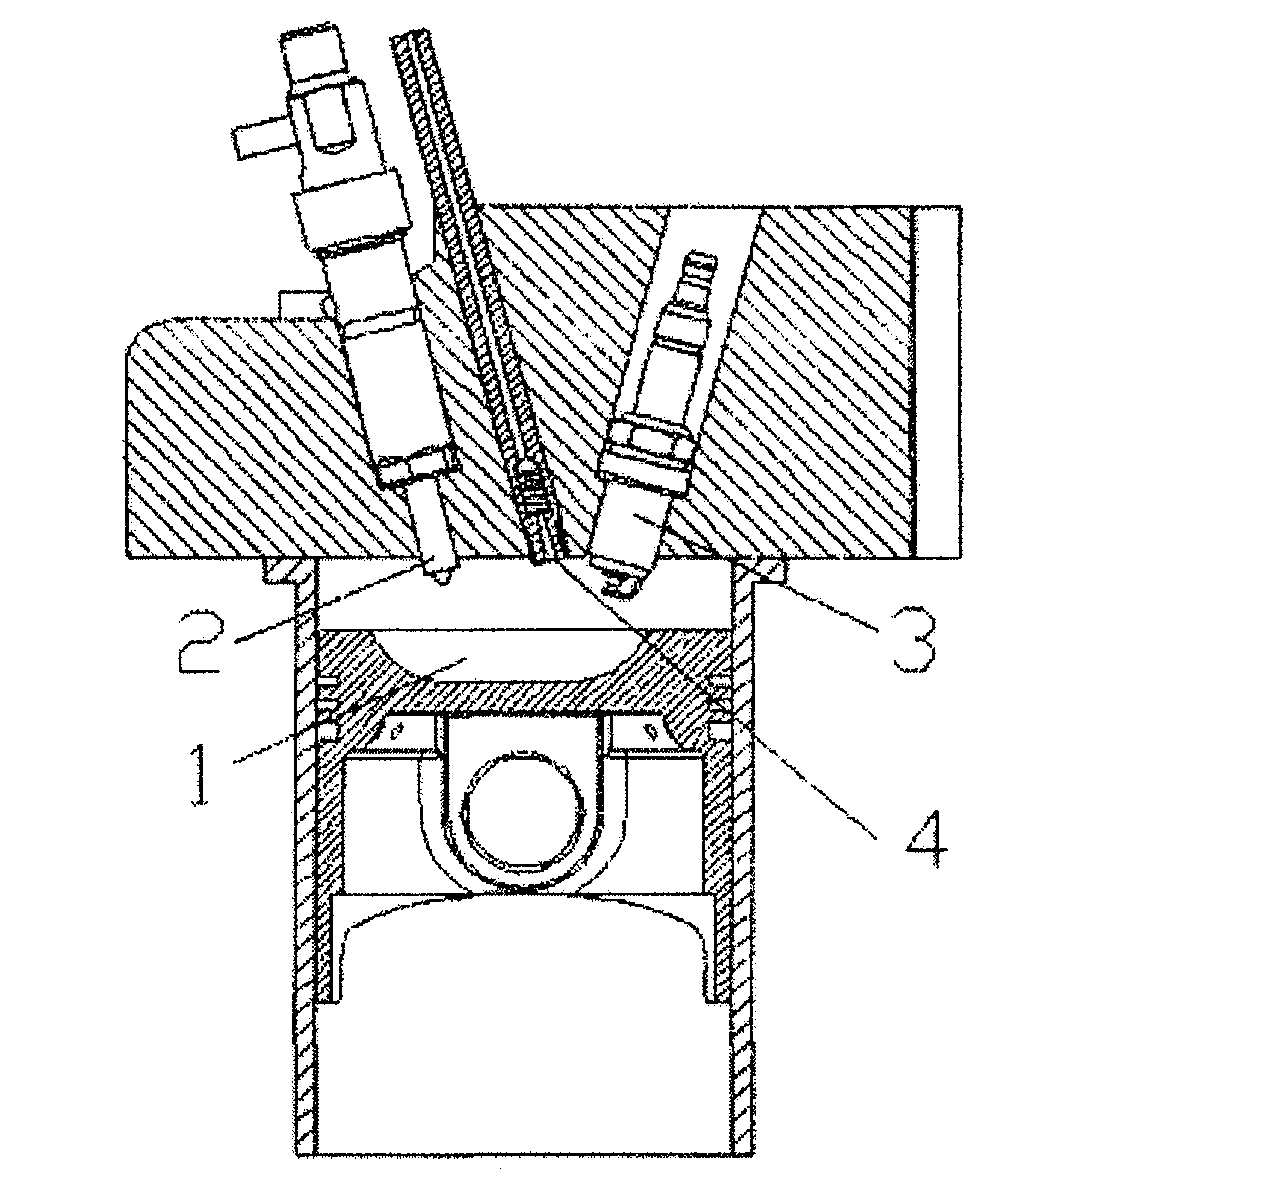 Multi-fuel pre-mixed combustion system of internal combustion engine